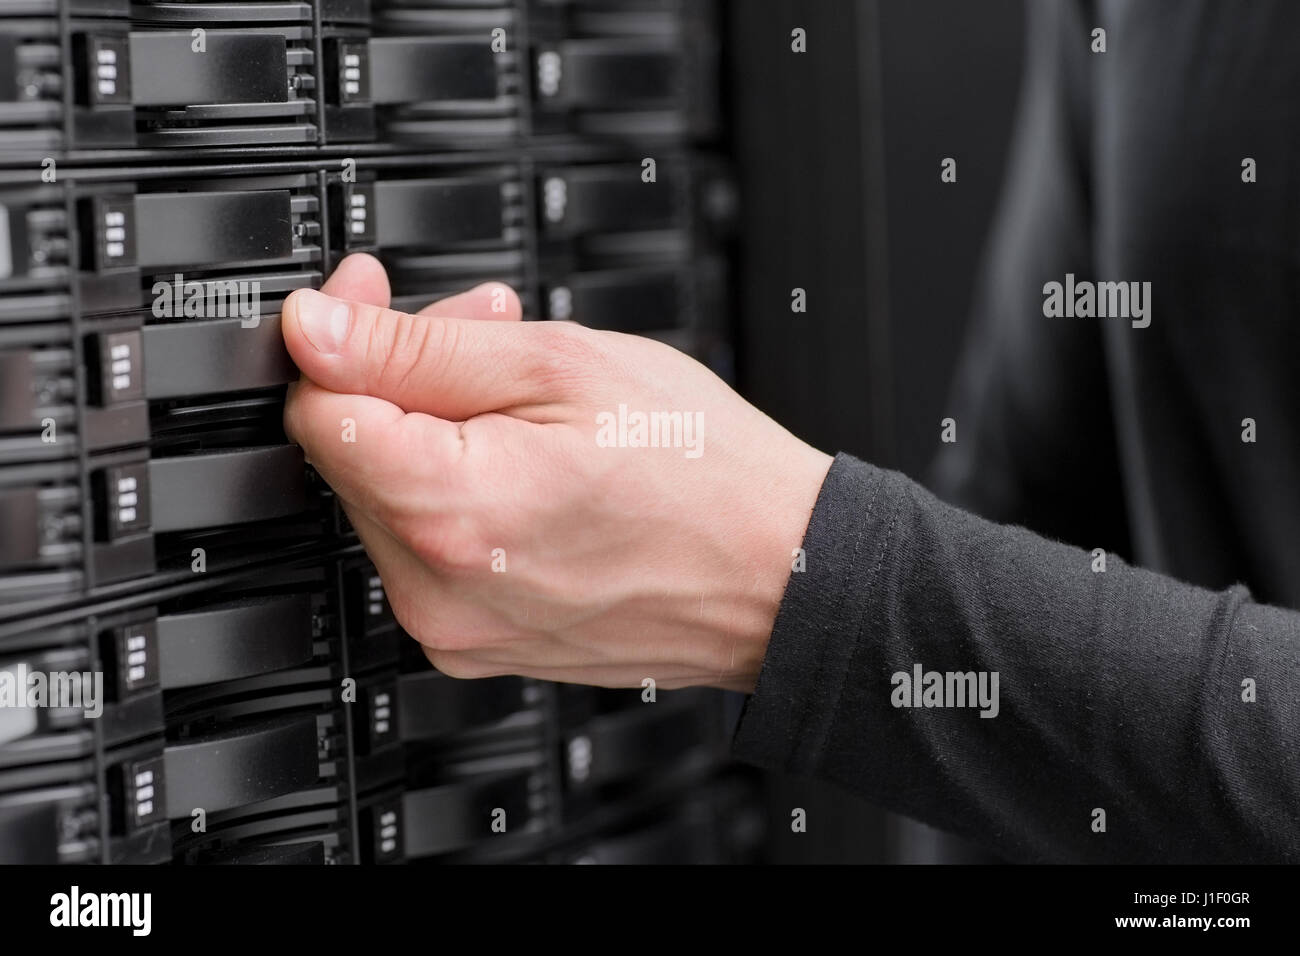 IT consultant maintain large SAN array in datacenter Stock Photo